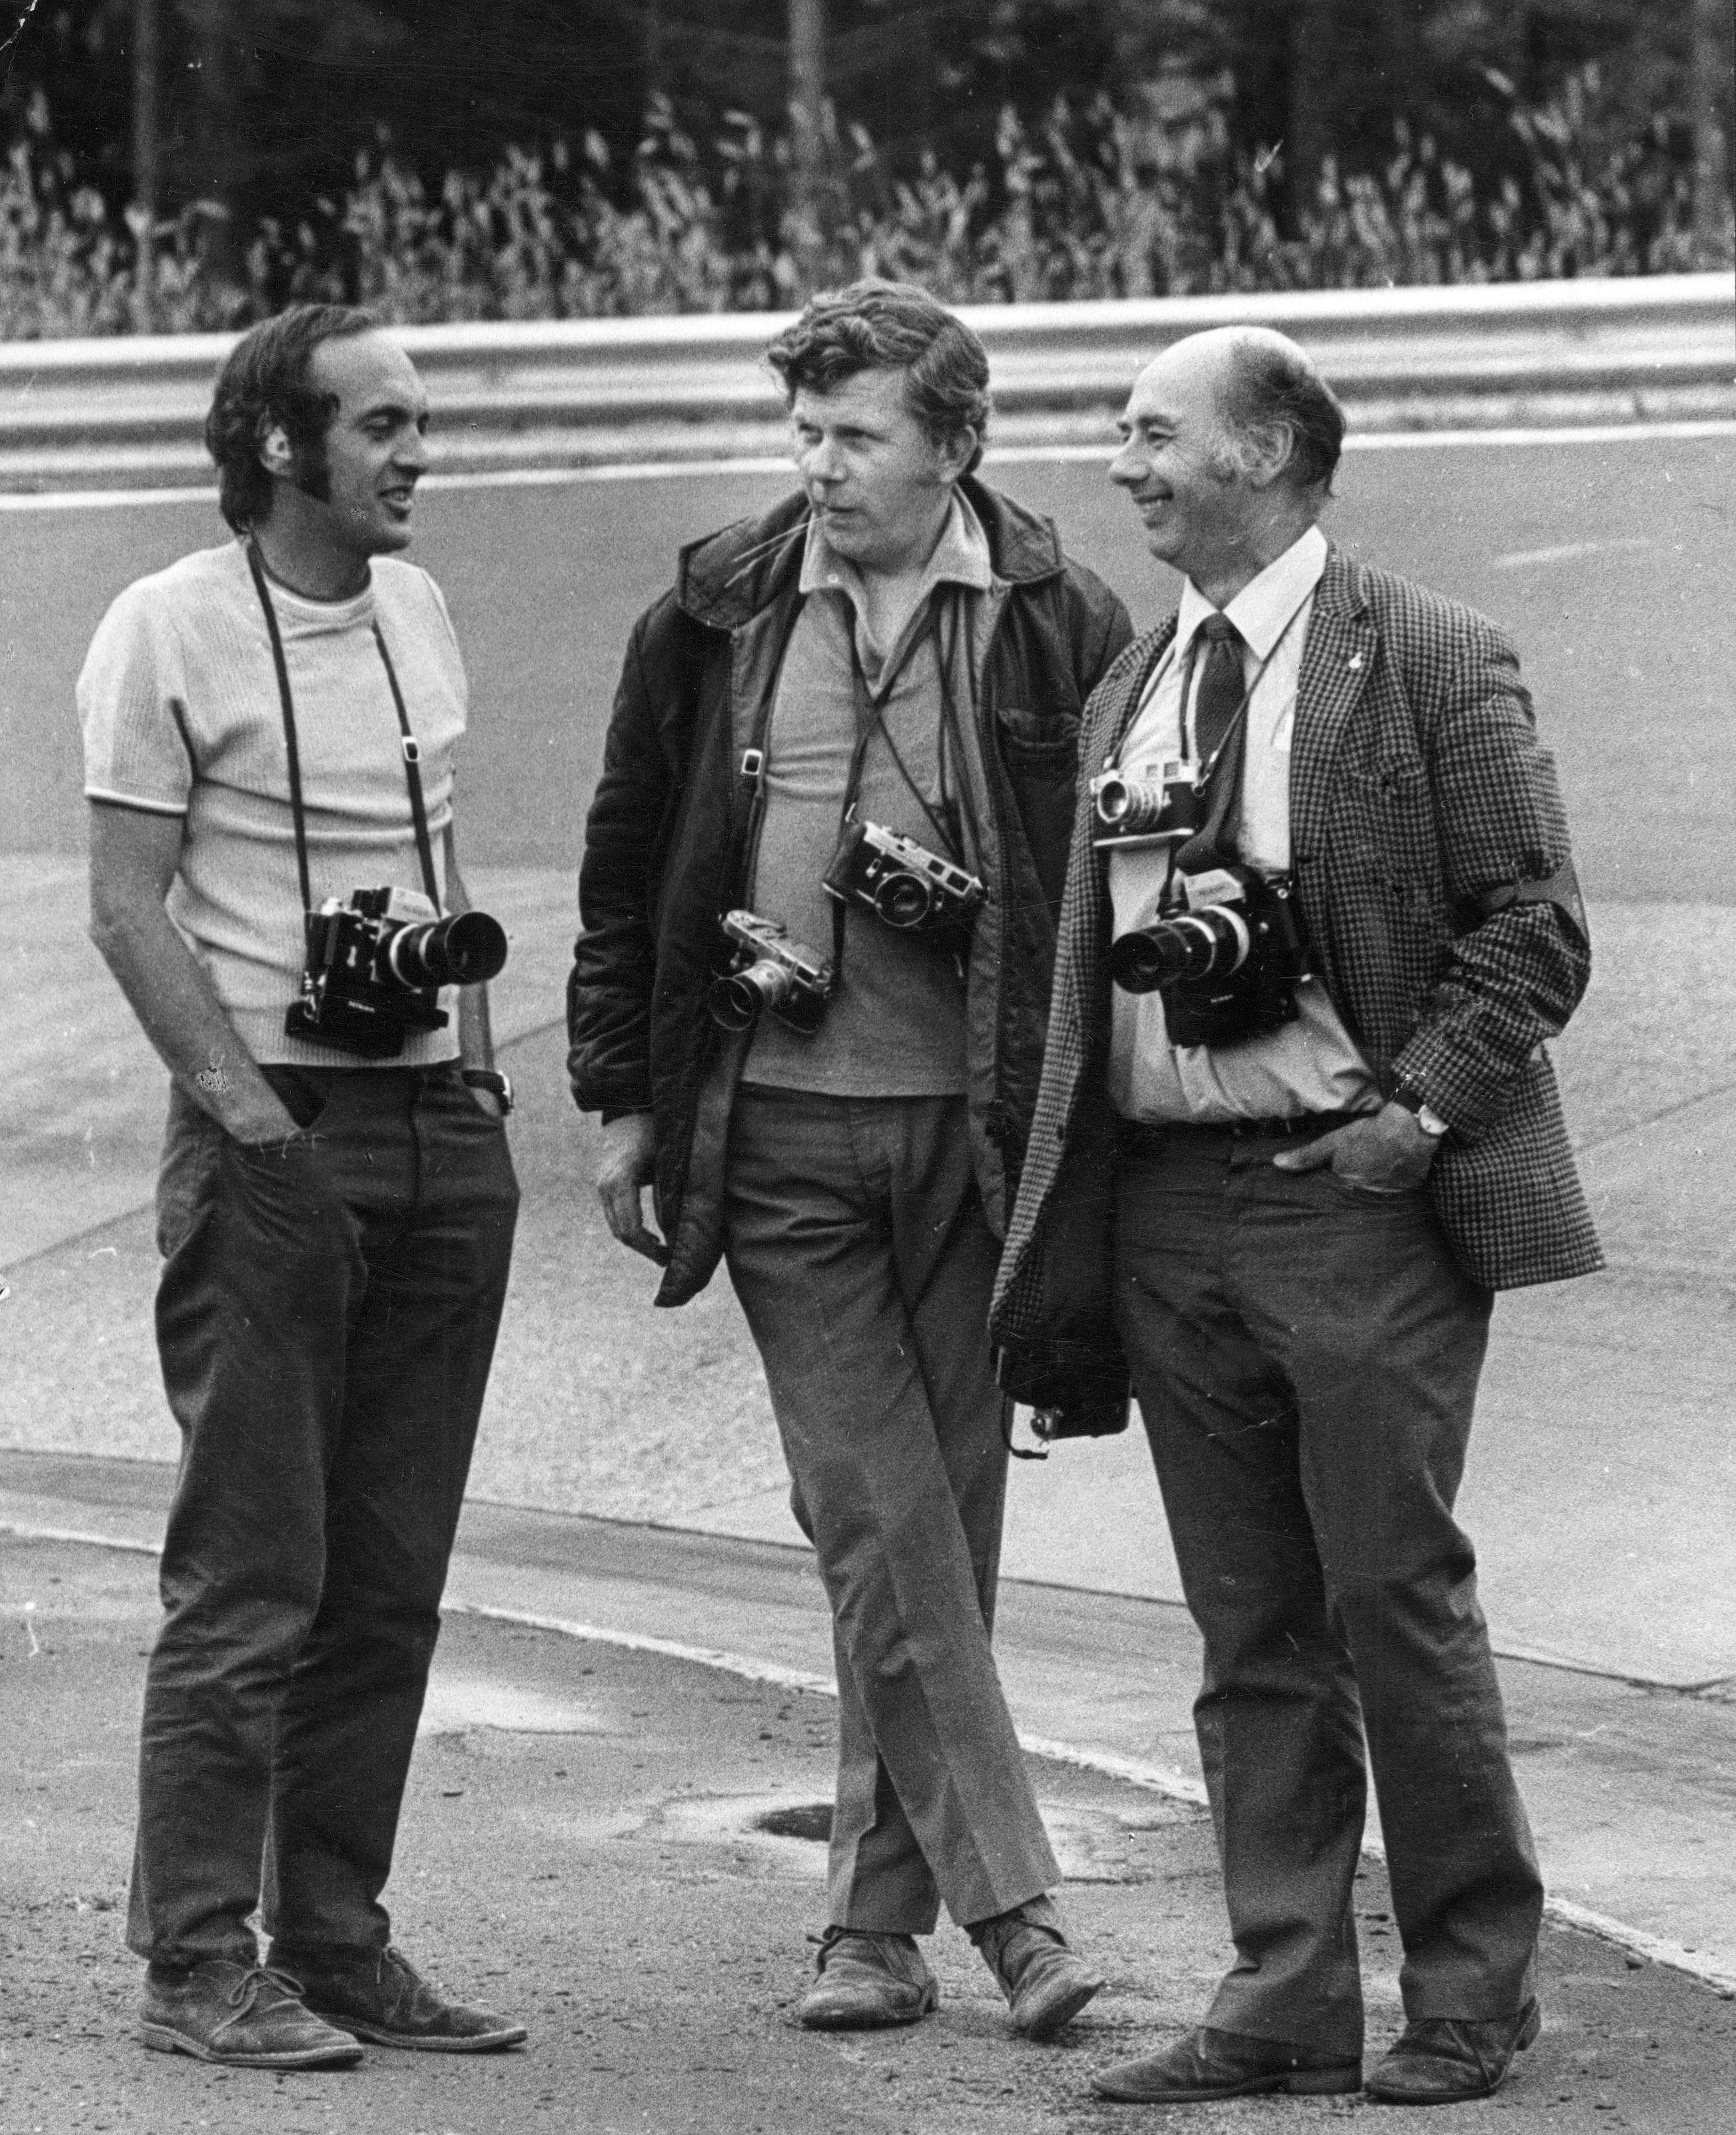 Karussel, Nurburgring - waiting for F1 practice to begin - Maurice Rowe (centre) with fellow photographers Laurie Morton of ‘Motoring News’ and ‘Motor Sport’ (left) and Geoff Goddard of ‘Road & Track’ right